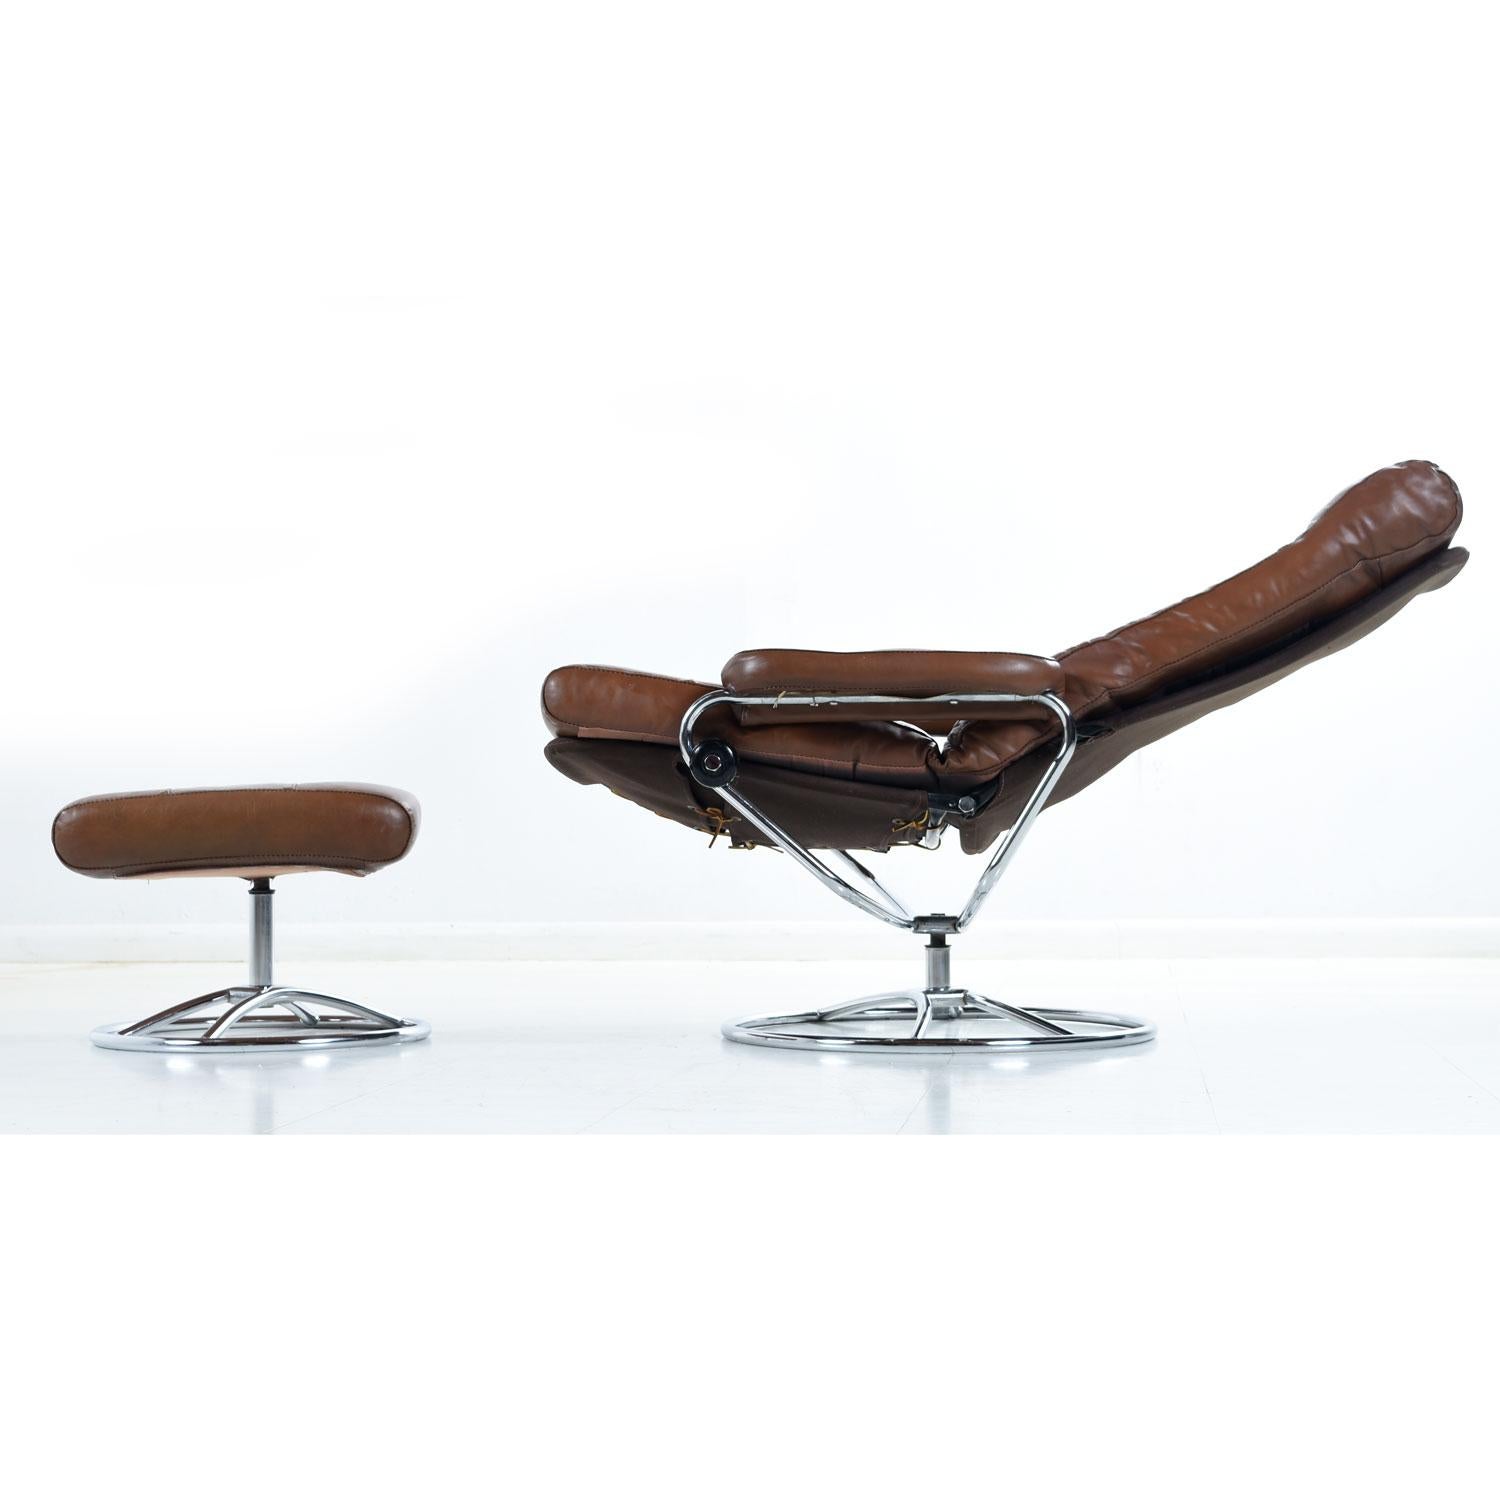 This unmarked Scandinavian sling chair is attributed to Ekornes. The chair features rich, saddle brown, leather upholstery. Push back to recline the chair to your desired angle and twist the dial to lock in your position. The tension on the dial can